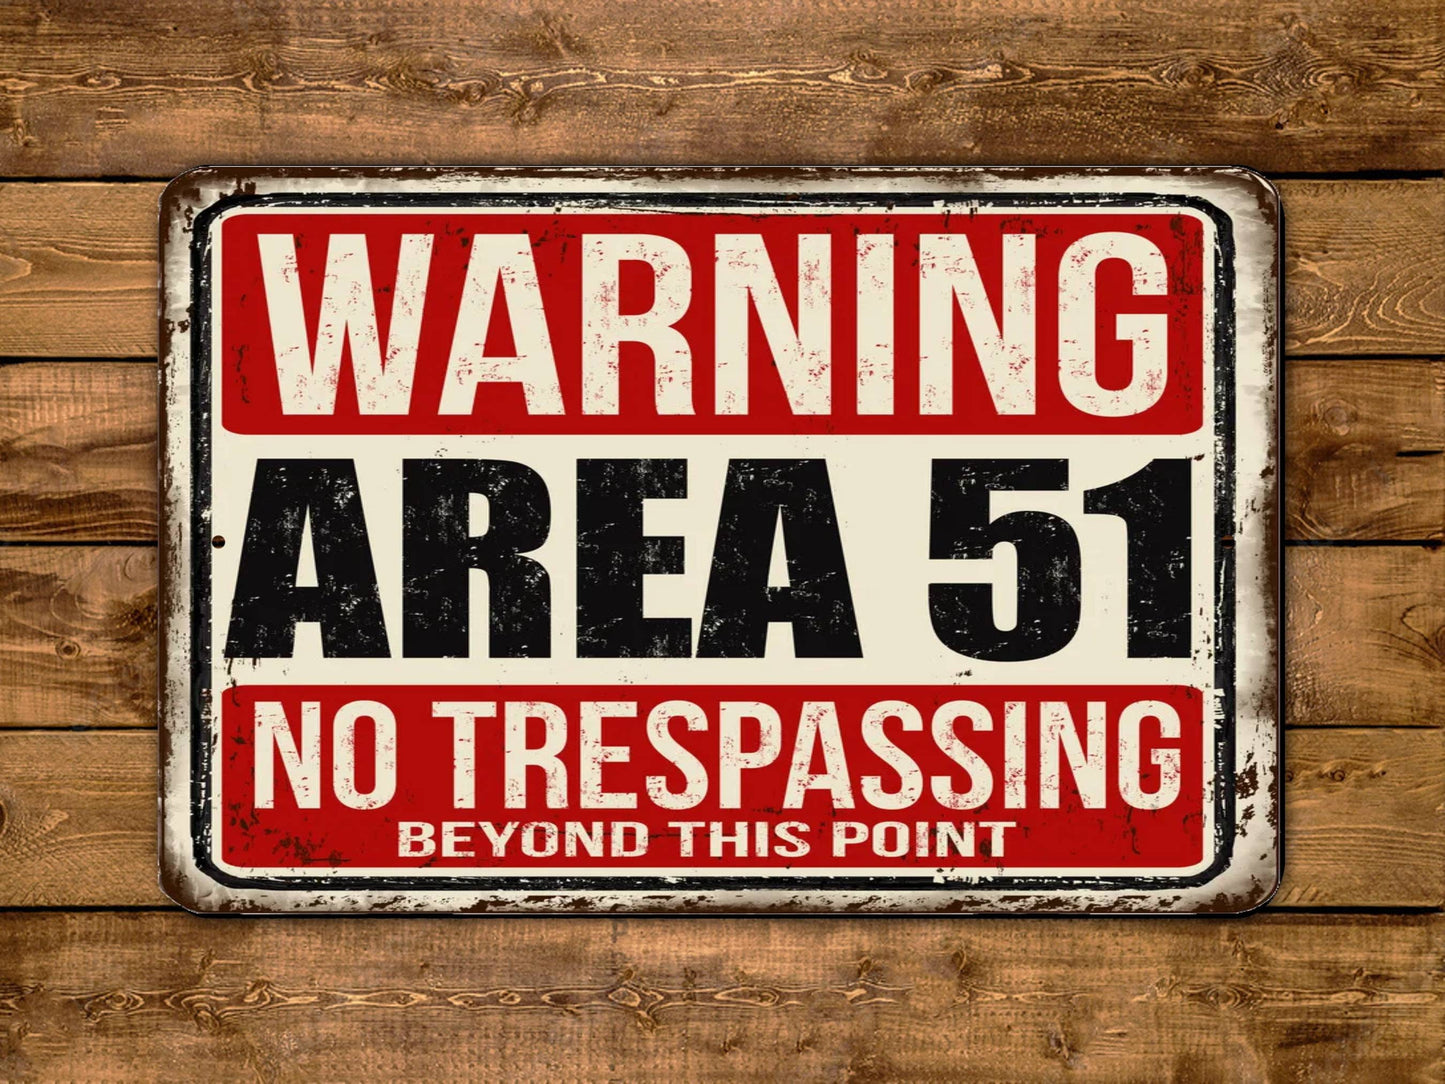 Warning Area 51 No Trespassing Vintage Style Metal Sign